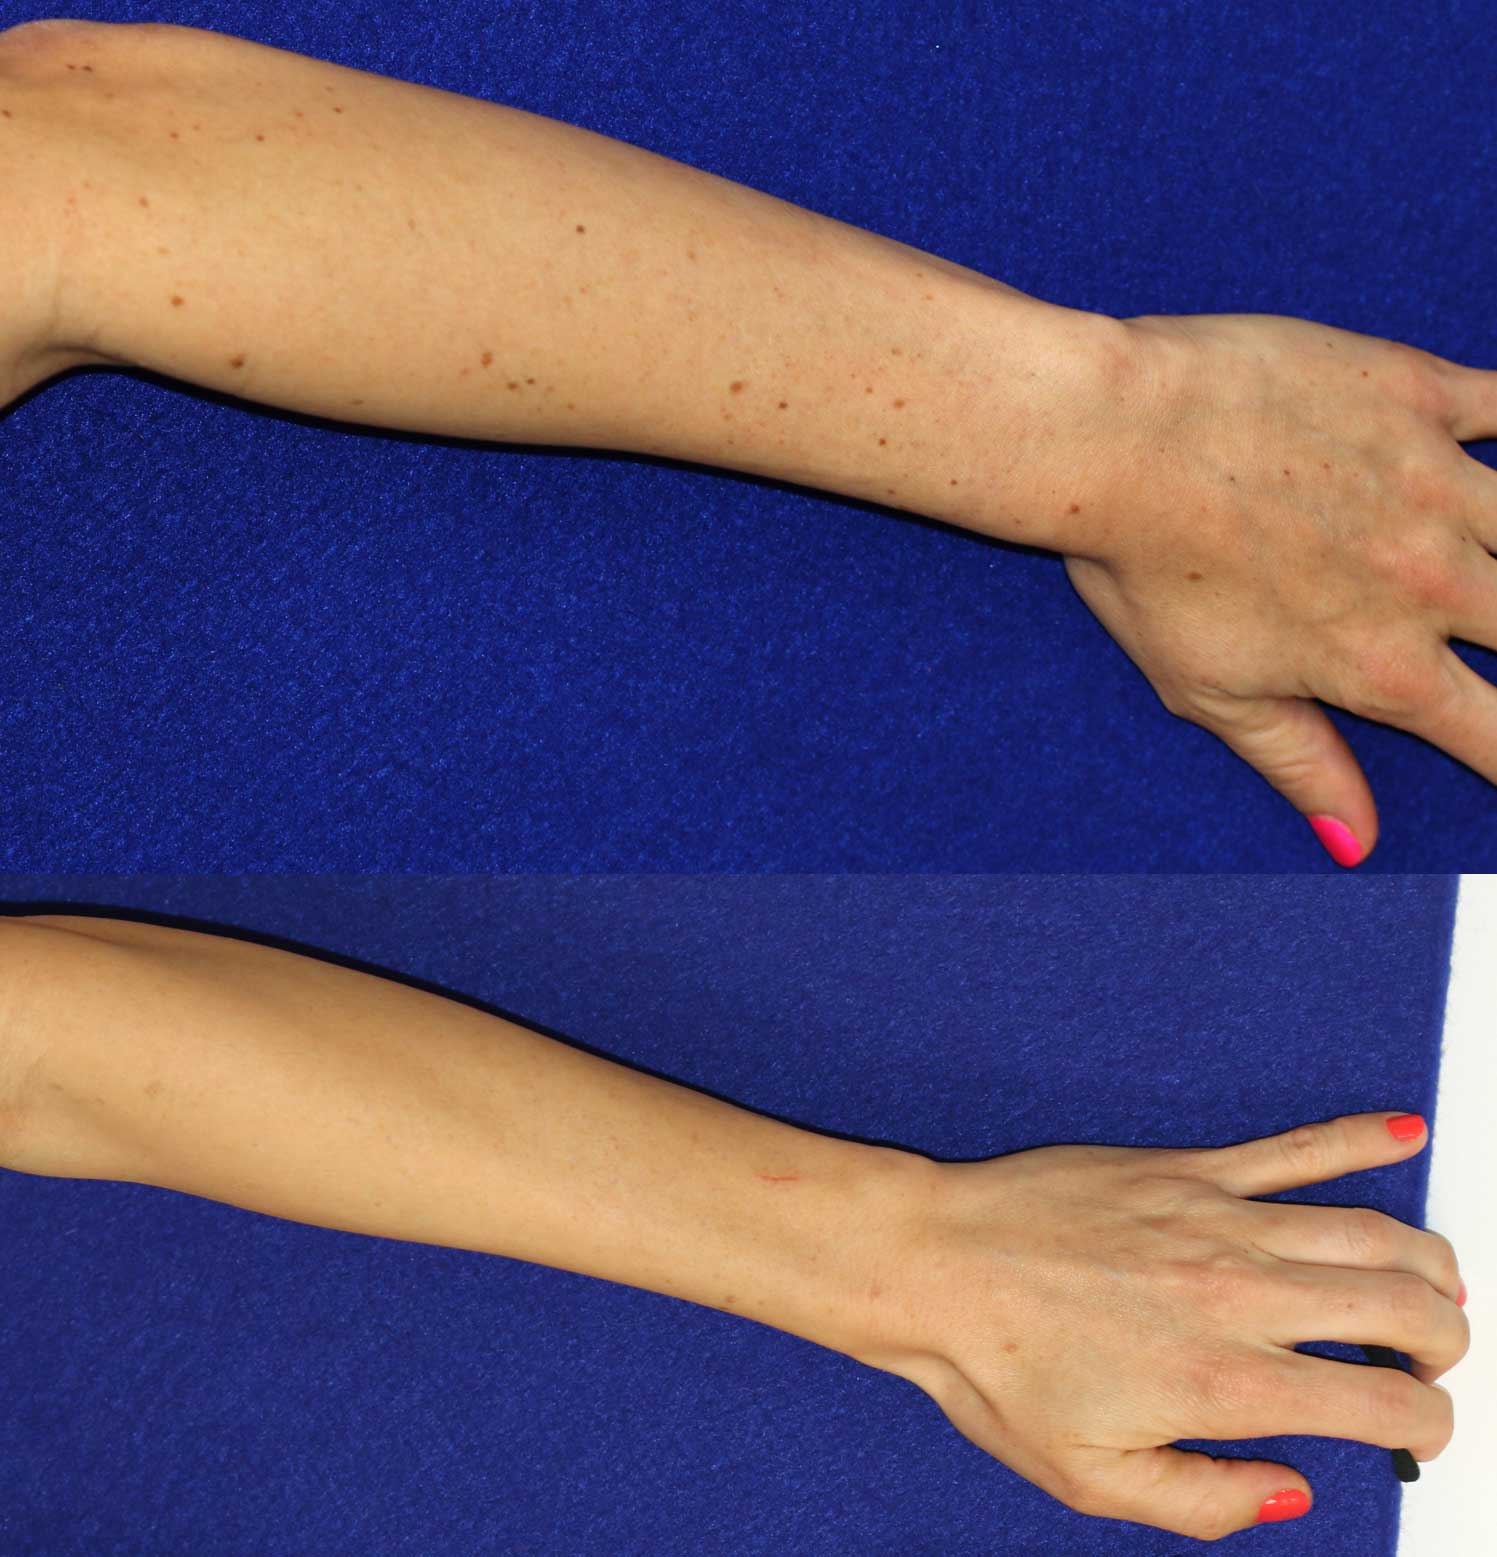 Laser treatment to arm and hand spots